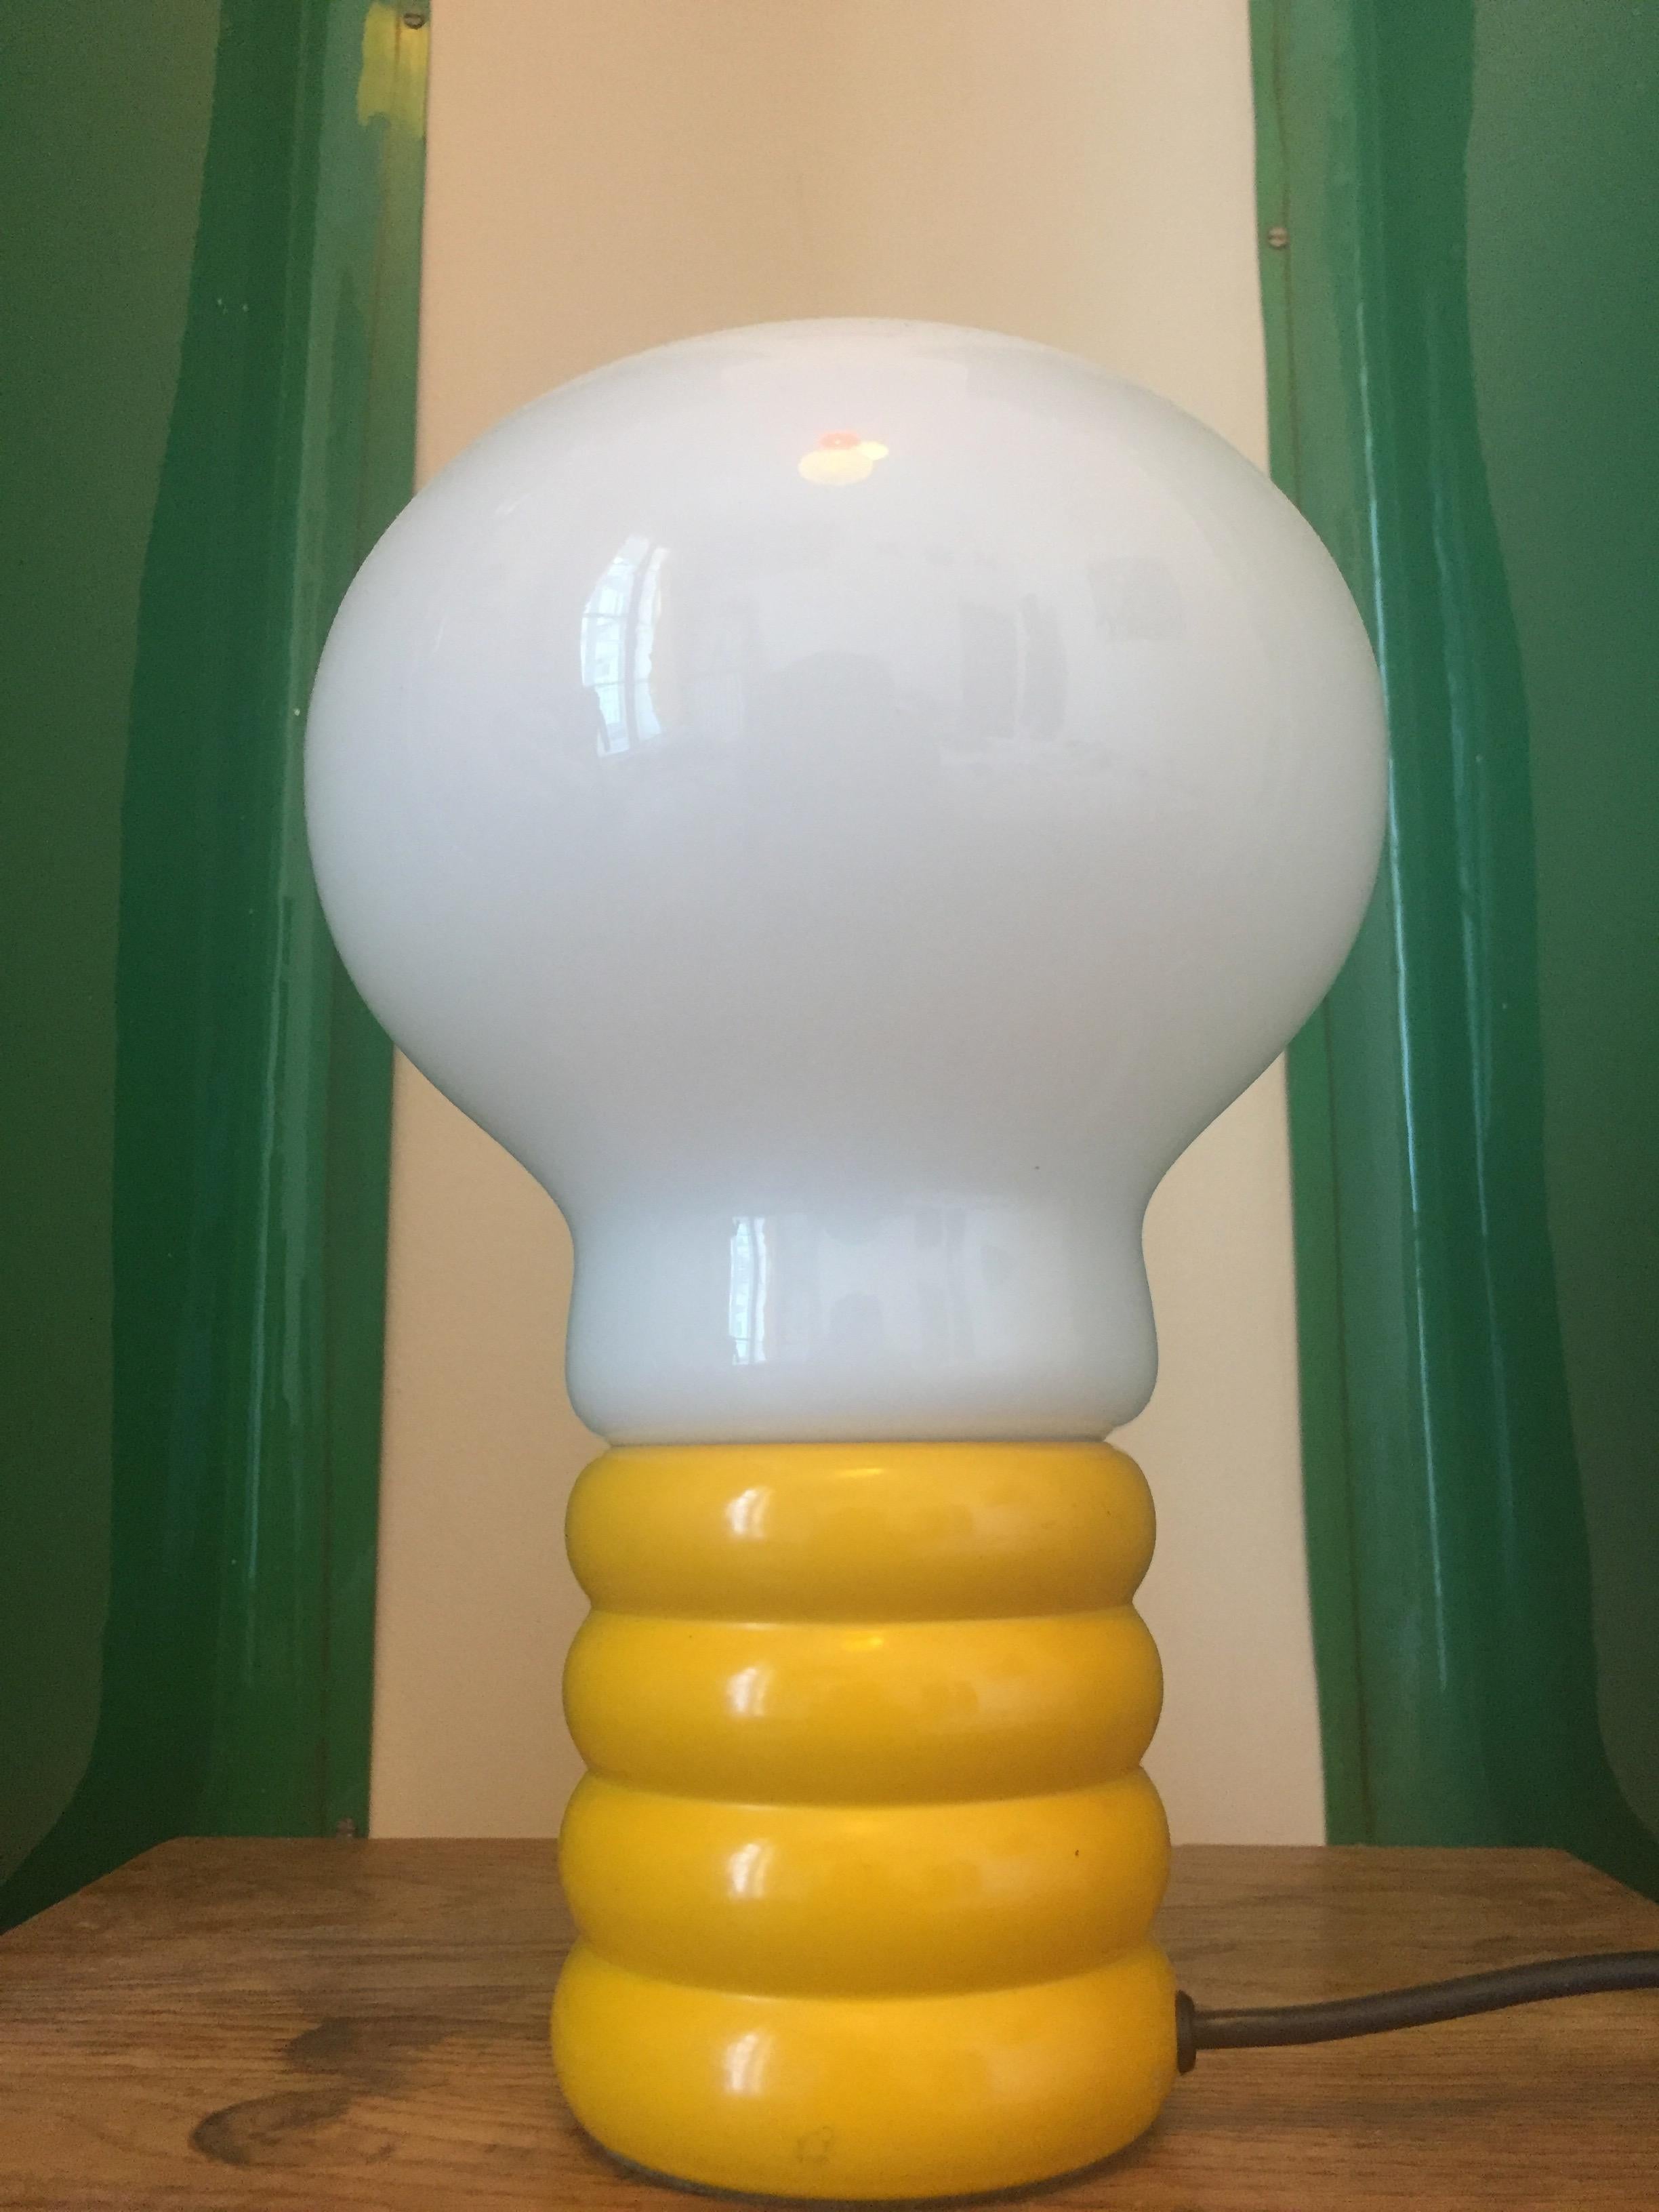 Rare and original table lamp by Ingo Maurer designed in the 1970s. The lamp is in ceramic yellow and white. Really good condition.